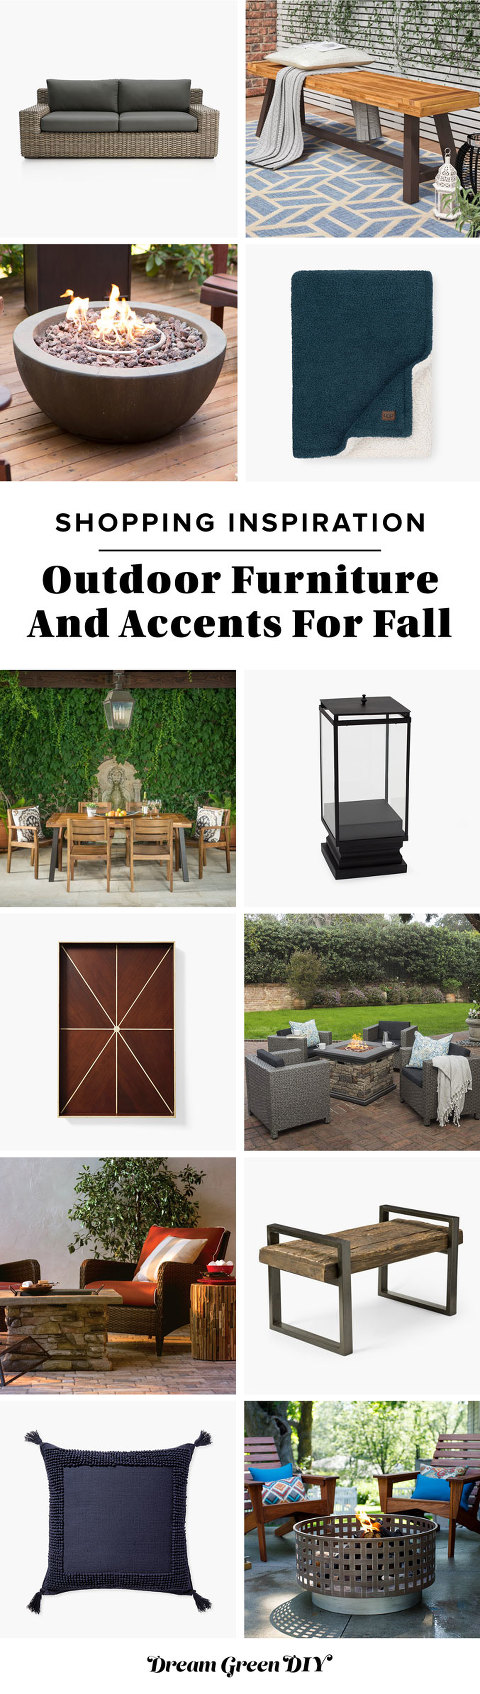 Outdoor Fall Furniture & Accessories